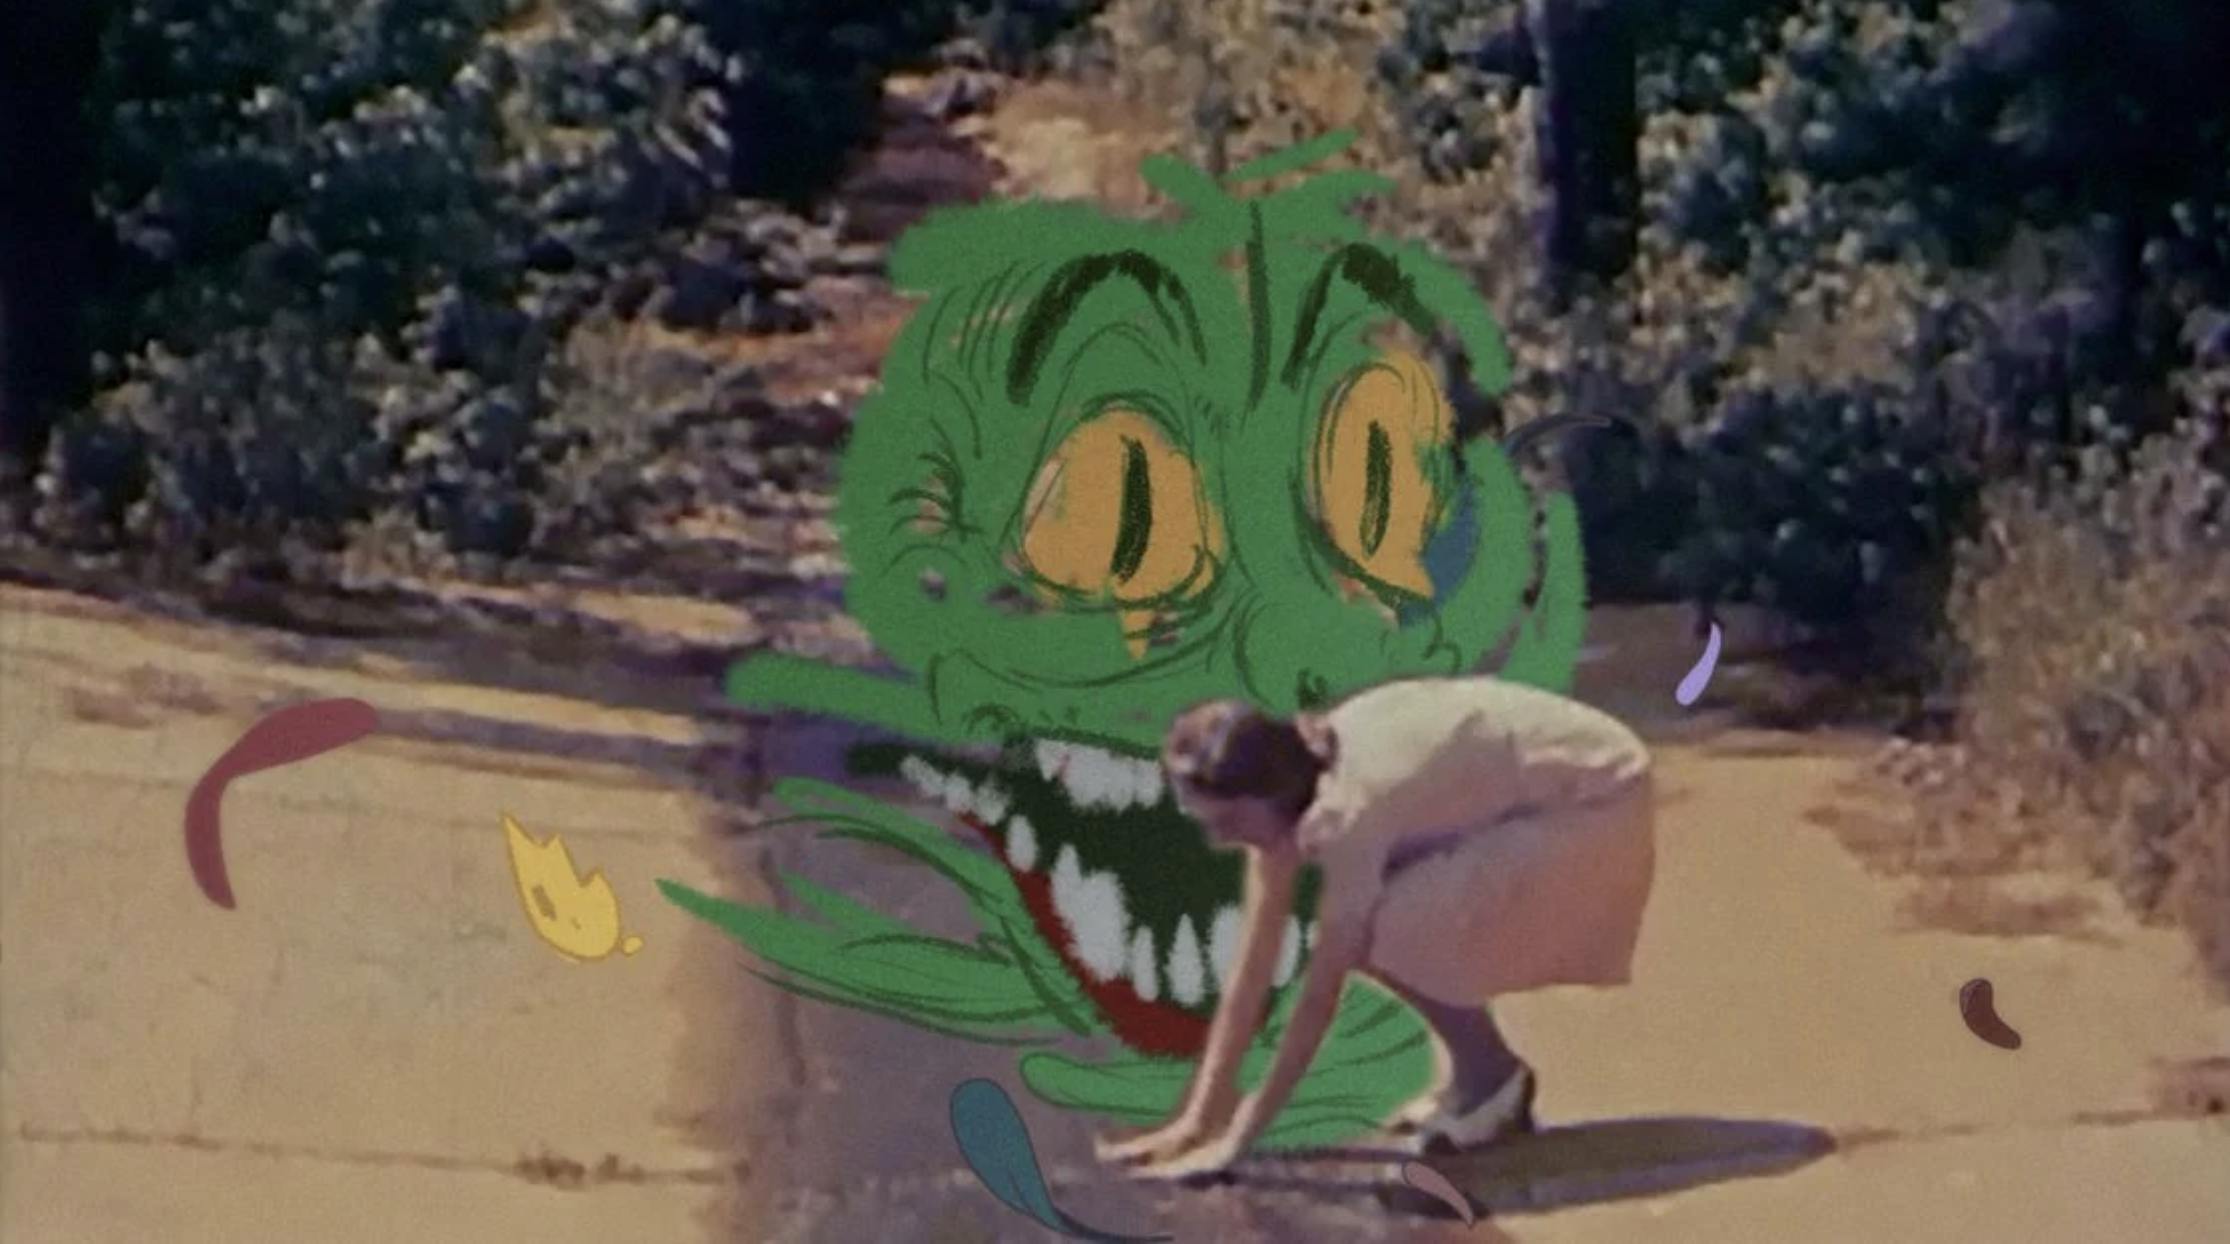 A girl puts her hand in a puddle, with a hand-drawn giant face with green skin and sharp teeth looming behind her